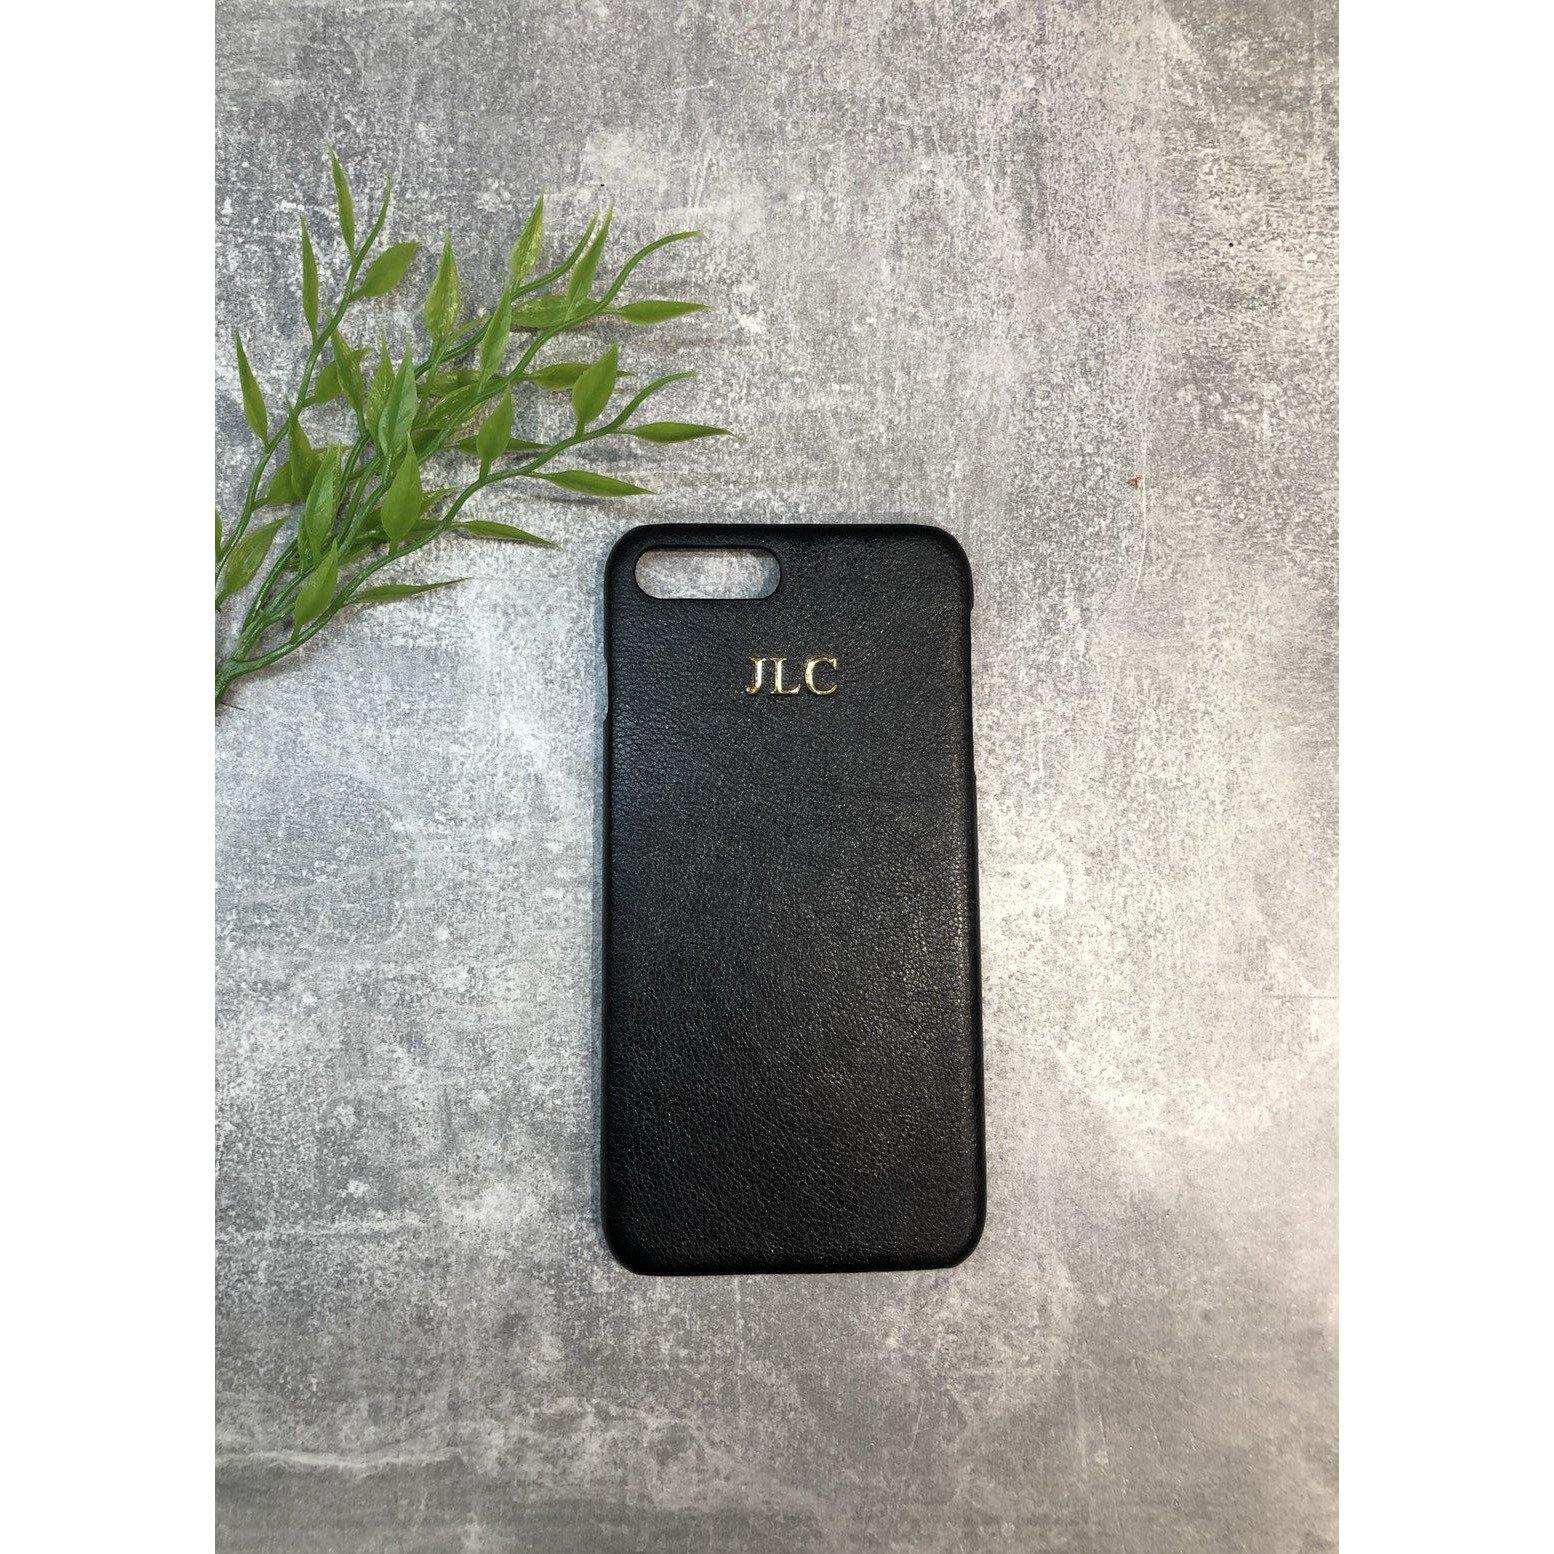 iPhone SE 2020 PU leather case personalised with your initials - PersonalisebyLisa